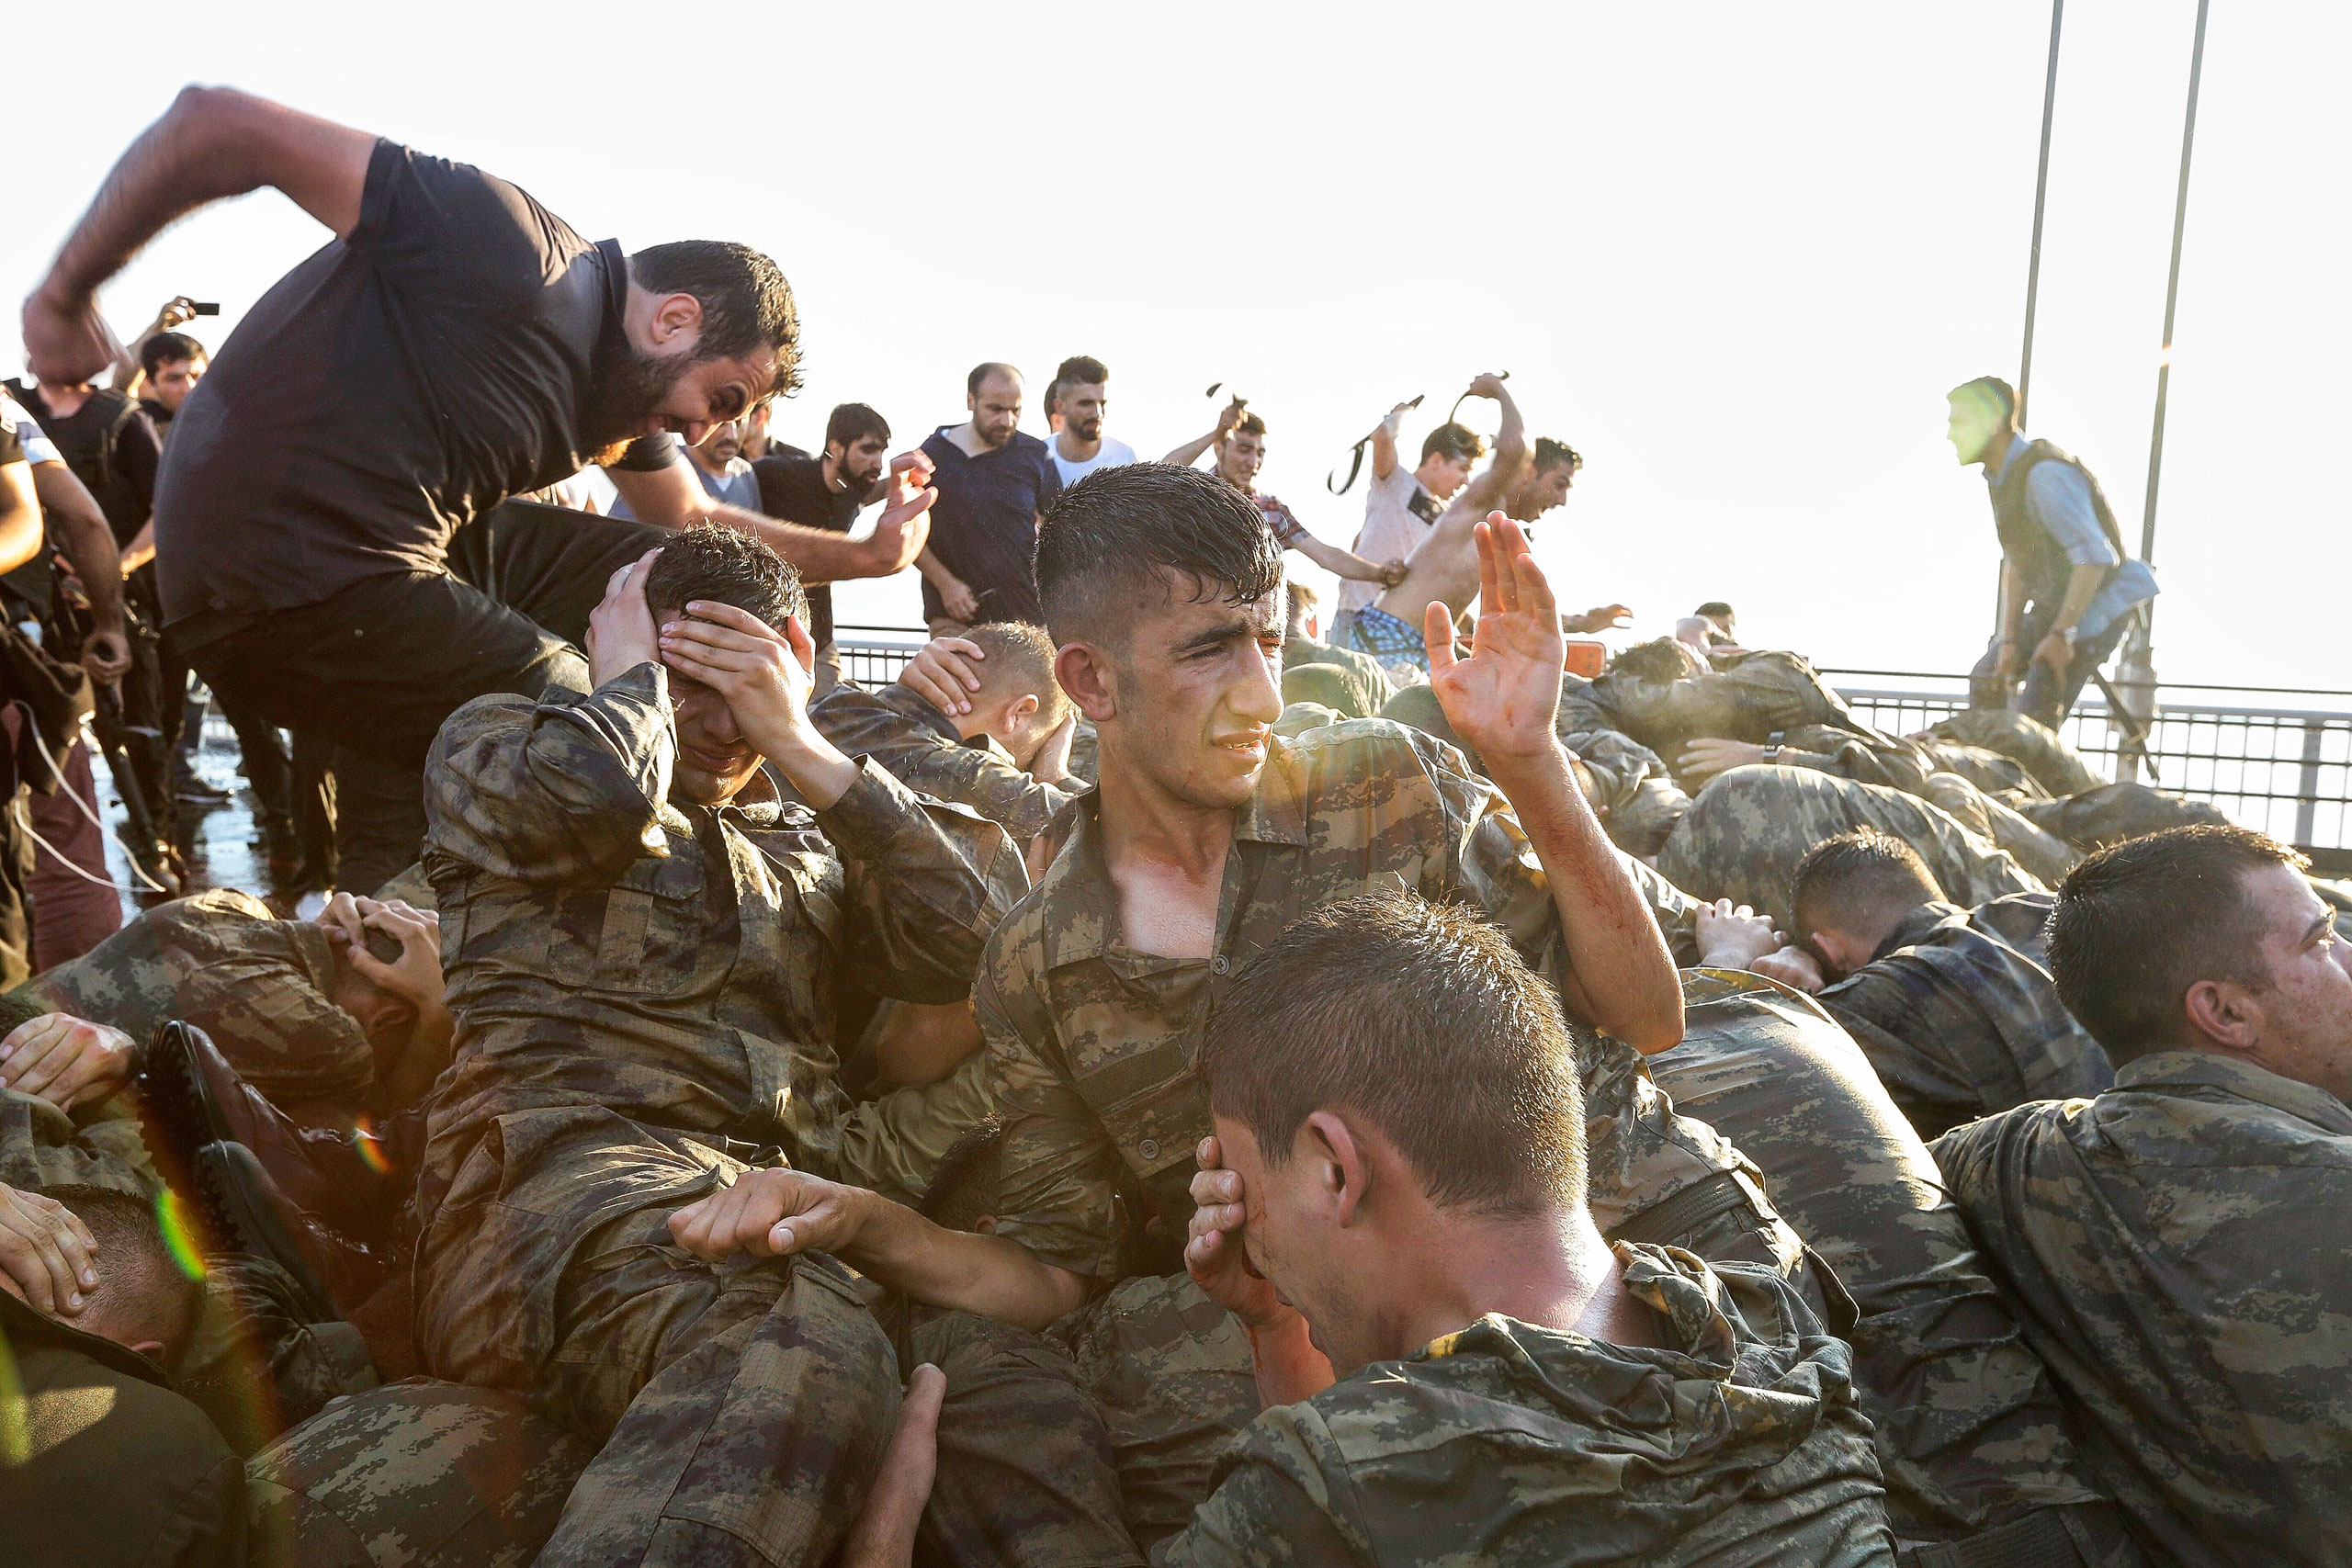 Soldiers involved in the attempted coup surrender on the Bosporus Bridge in Istanbul early on July 16; thousands of suspected plotters were later rounded up (Gokhan Tan—Getty Images)